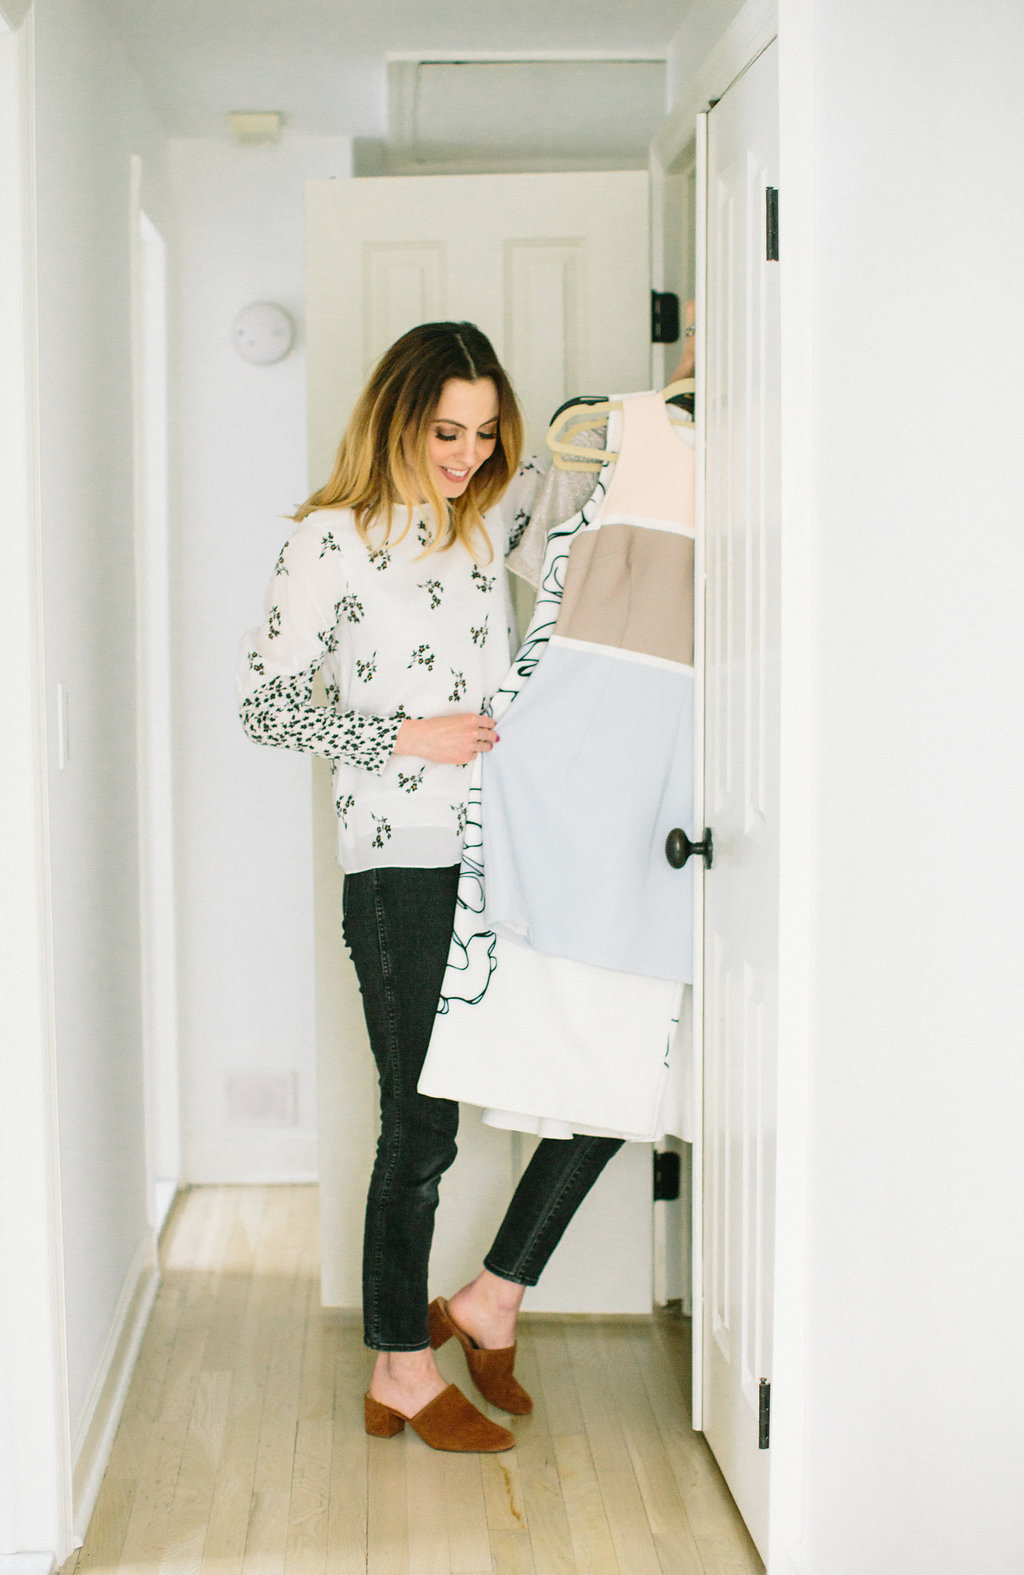 Eva Amurri Martino organizes her closet and puts pieces away according to color, type, and style